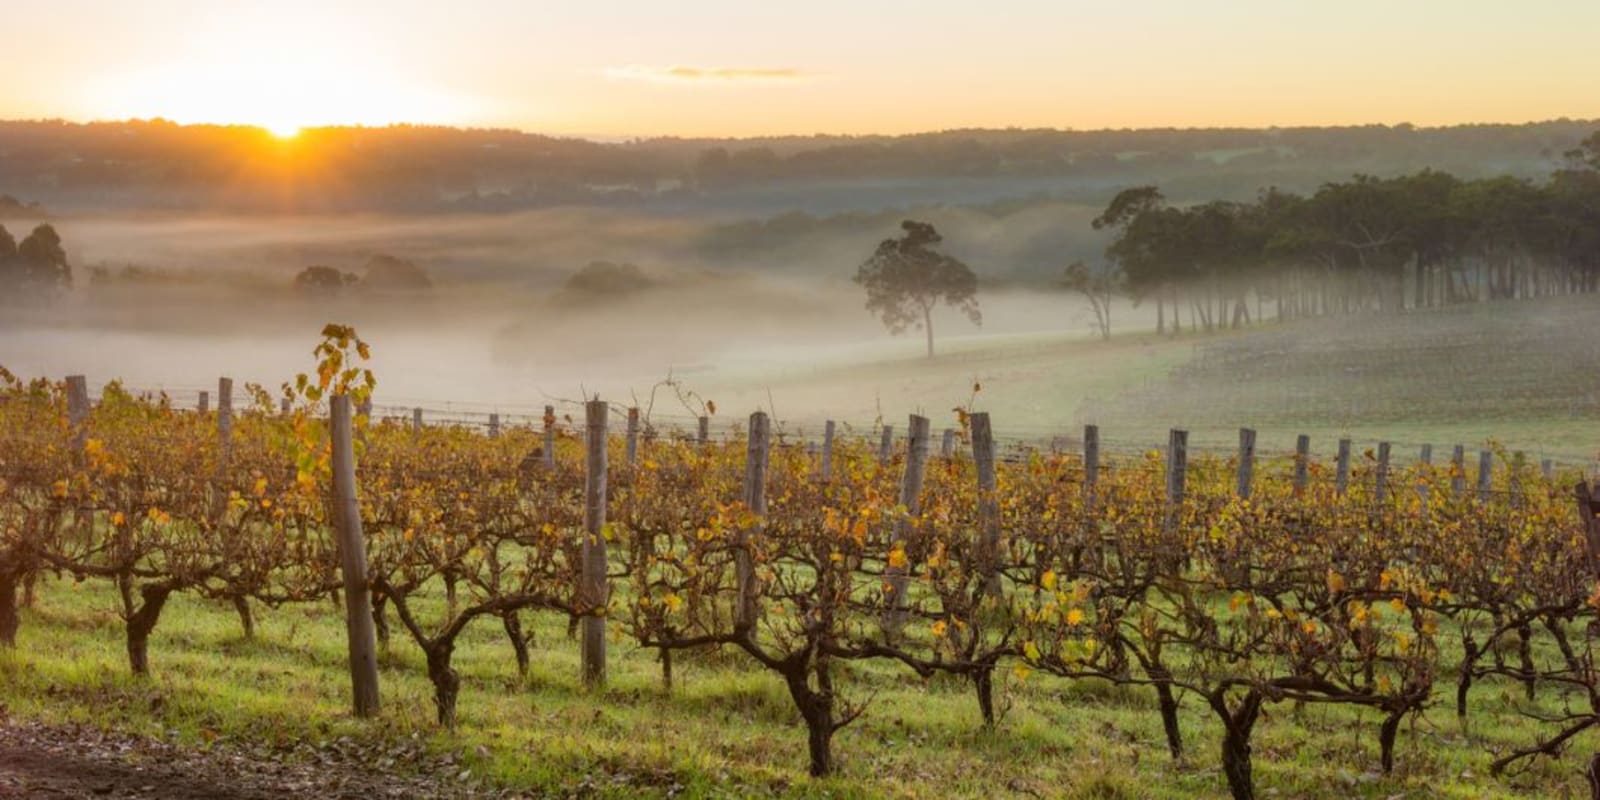 The sun rising over a wine vineyard.